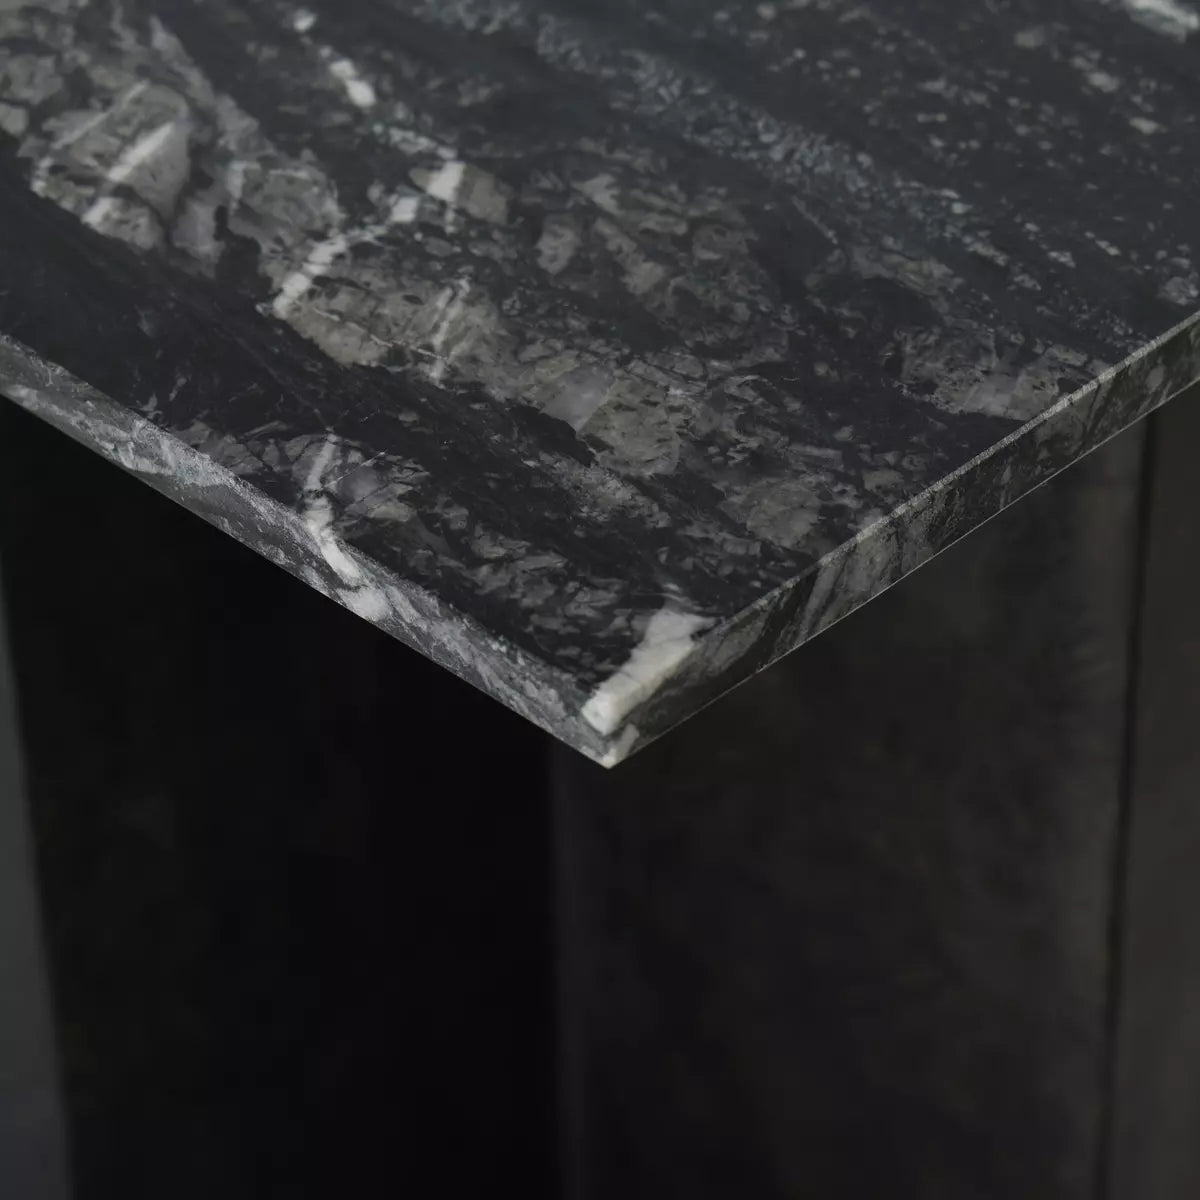 Terrell Large Console Table Black Marble